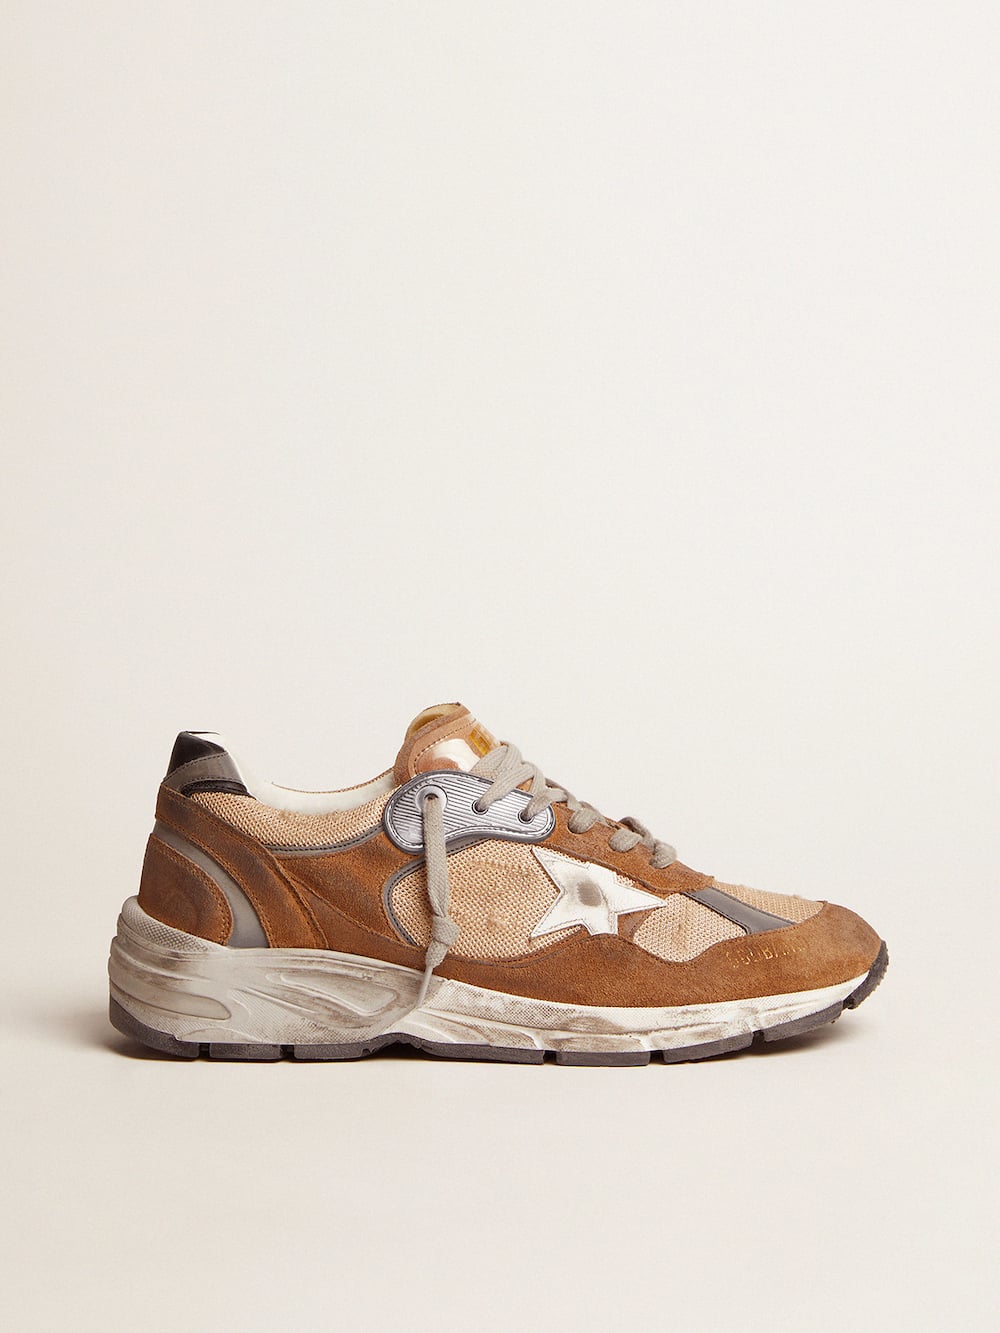 Golden Goose - Men's Dad-Star in tobacco-colored mesh and suede with white star in 